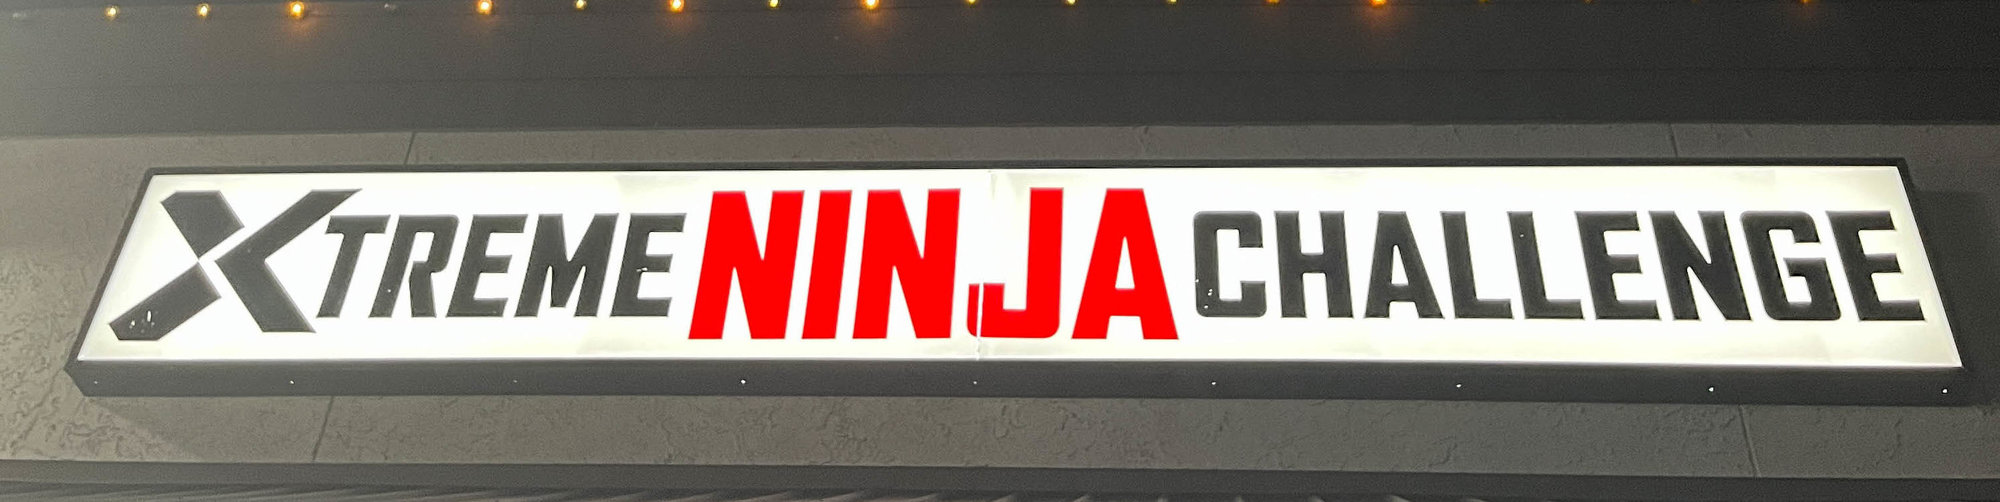 white sign with black and red text for xtreme ninja challenge